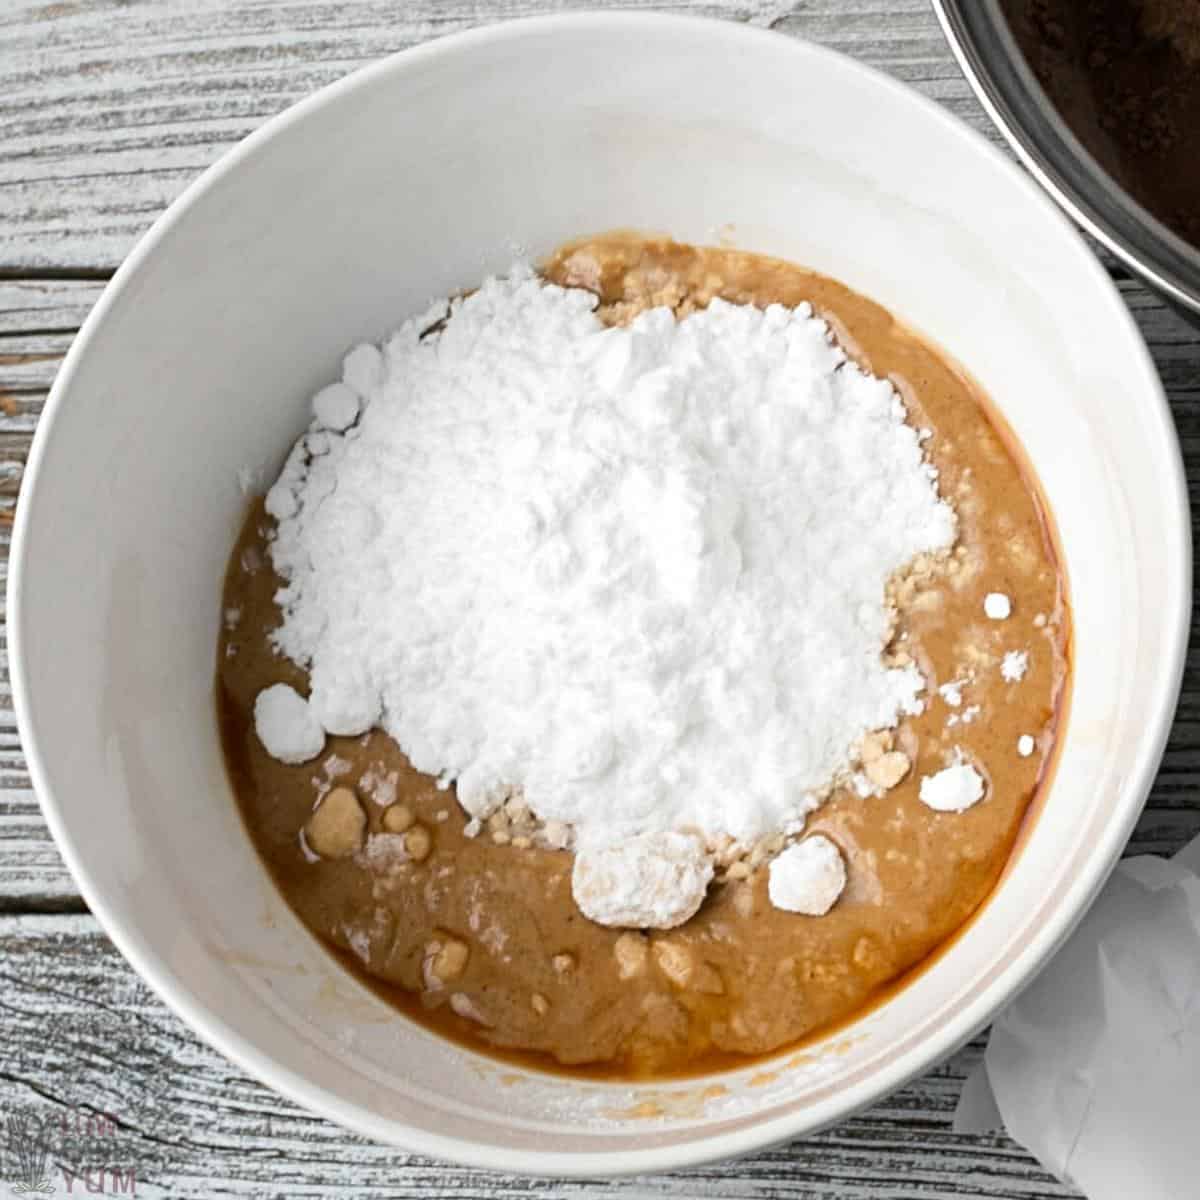 peanut butter mixture ingredients in white mixing bowl.